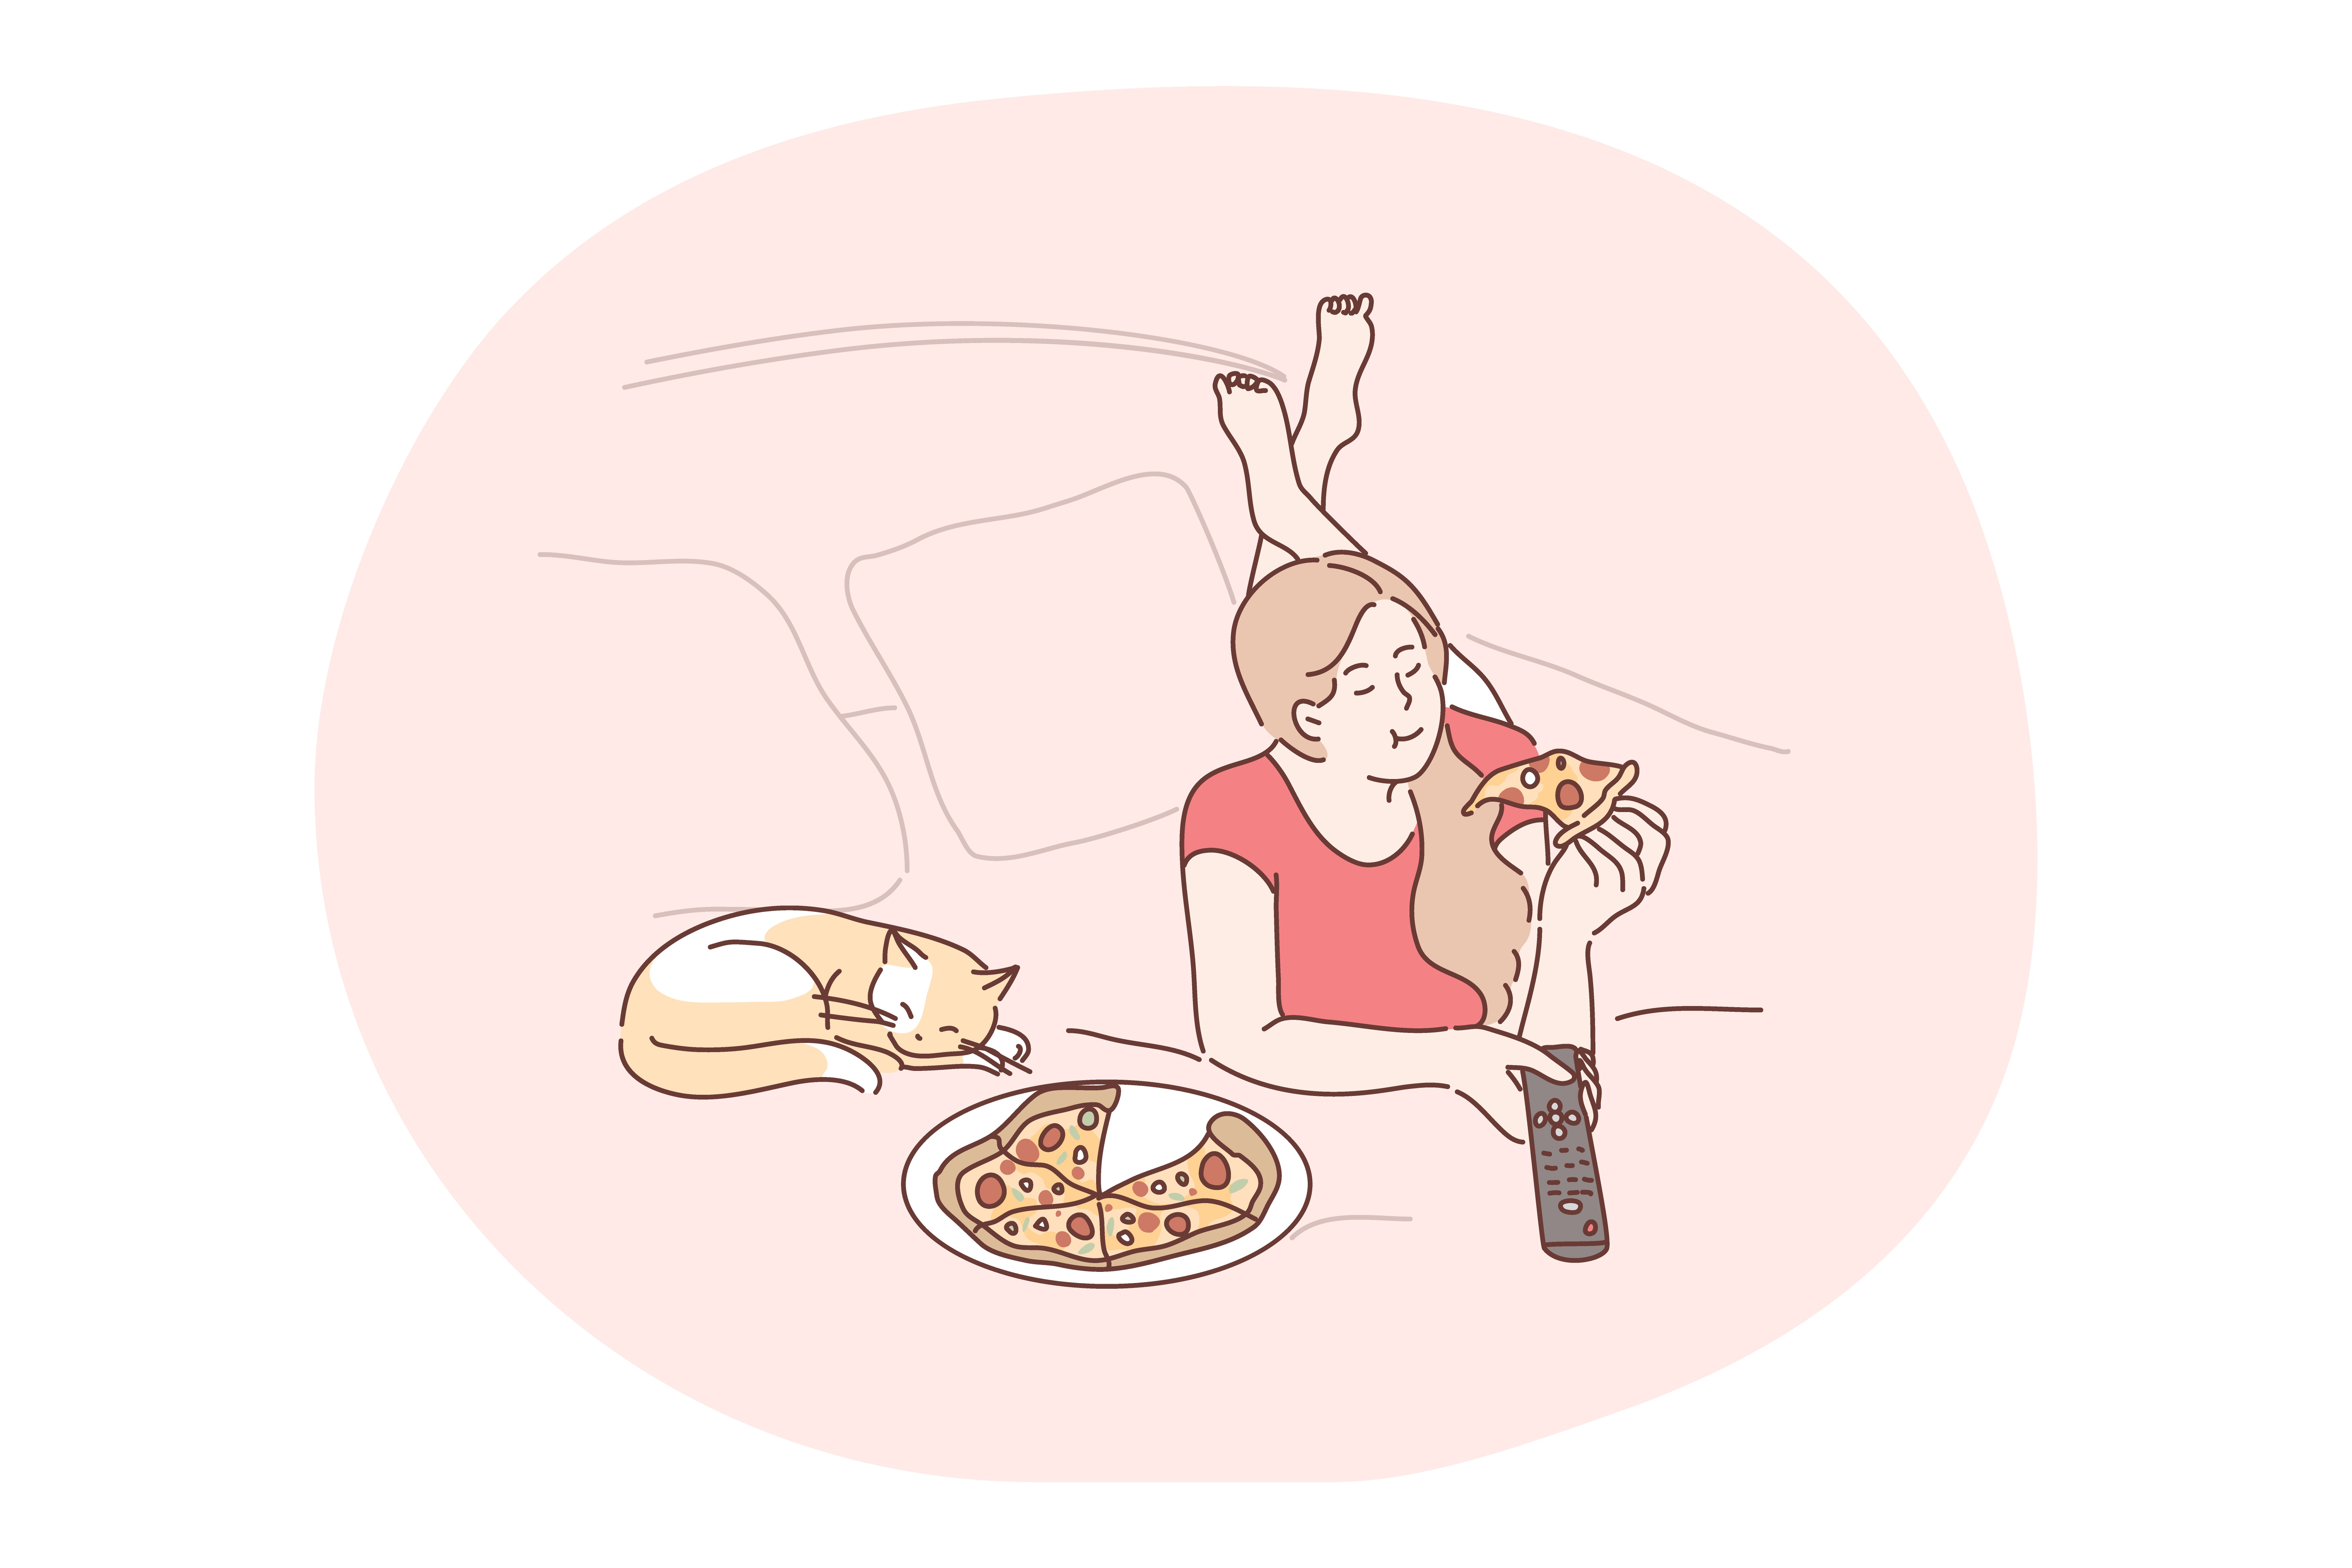 Pizza delivery service, relax in bed with movie and pizza concept. Young girl cartoon character staying in bed, watching television and eating delivered pizza at home with sleeping cat nearby. Pizza delivery service, relax in bed with movie and pizza concept